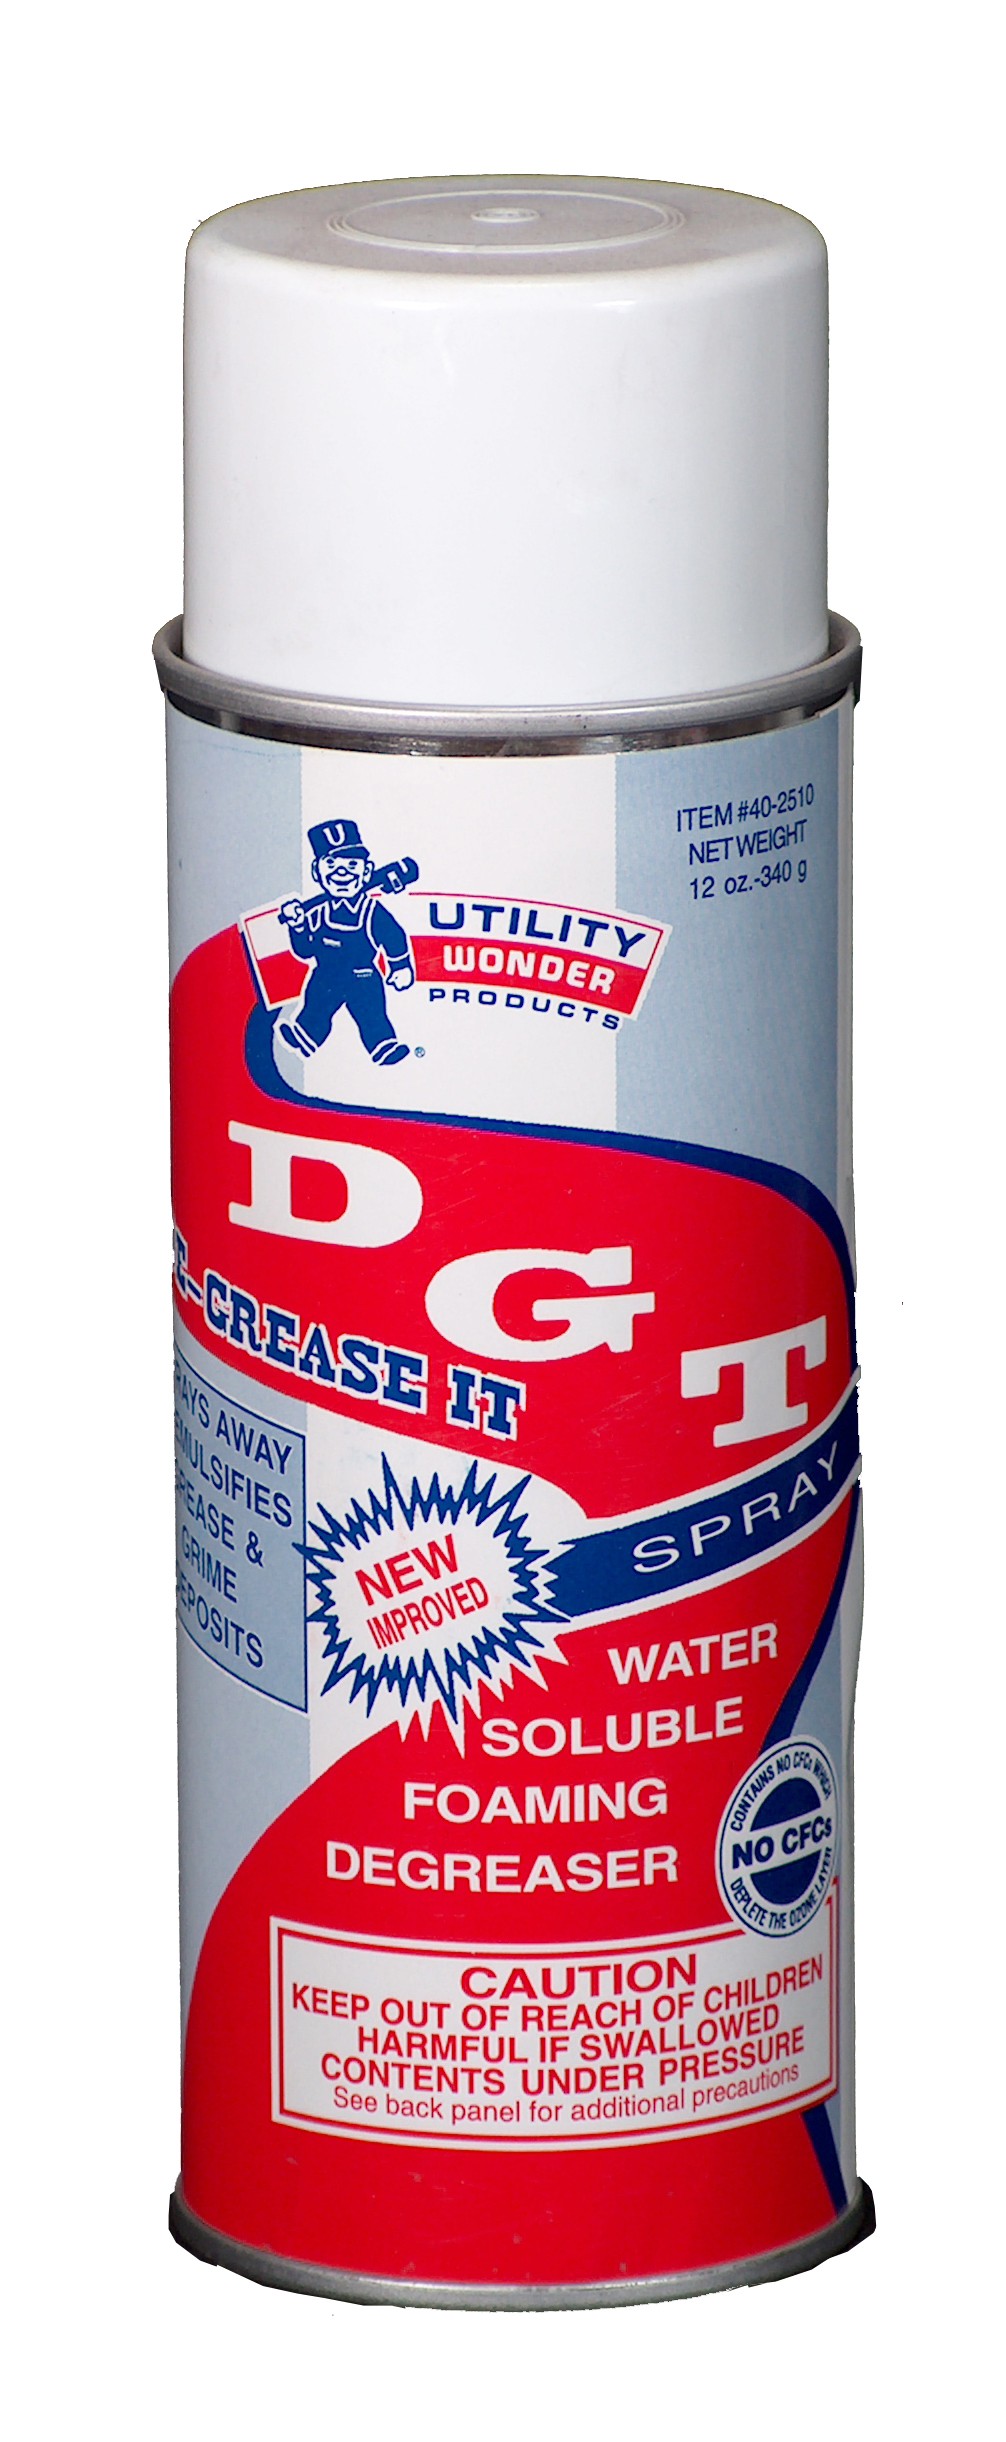 D.G.T. WATER-SOLUBLE FOAMING DEGREASER